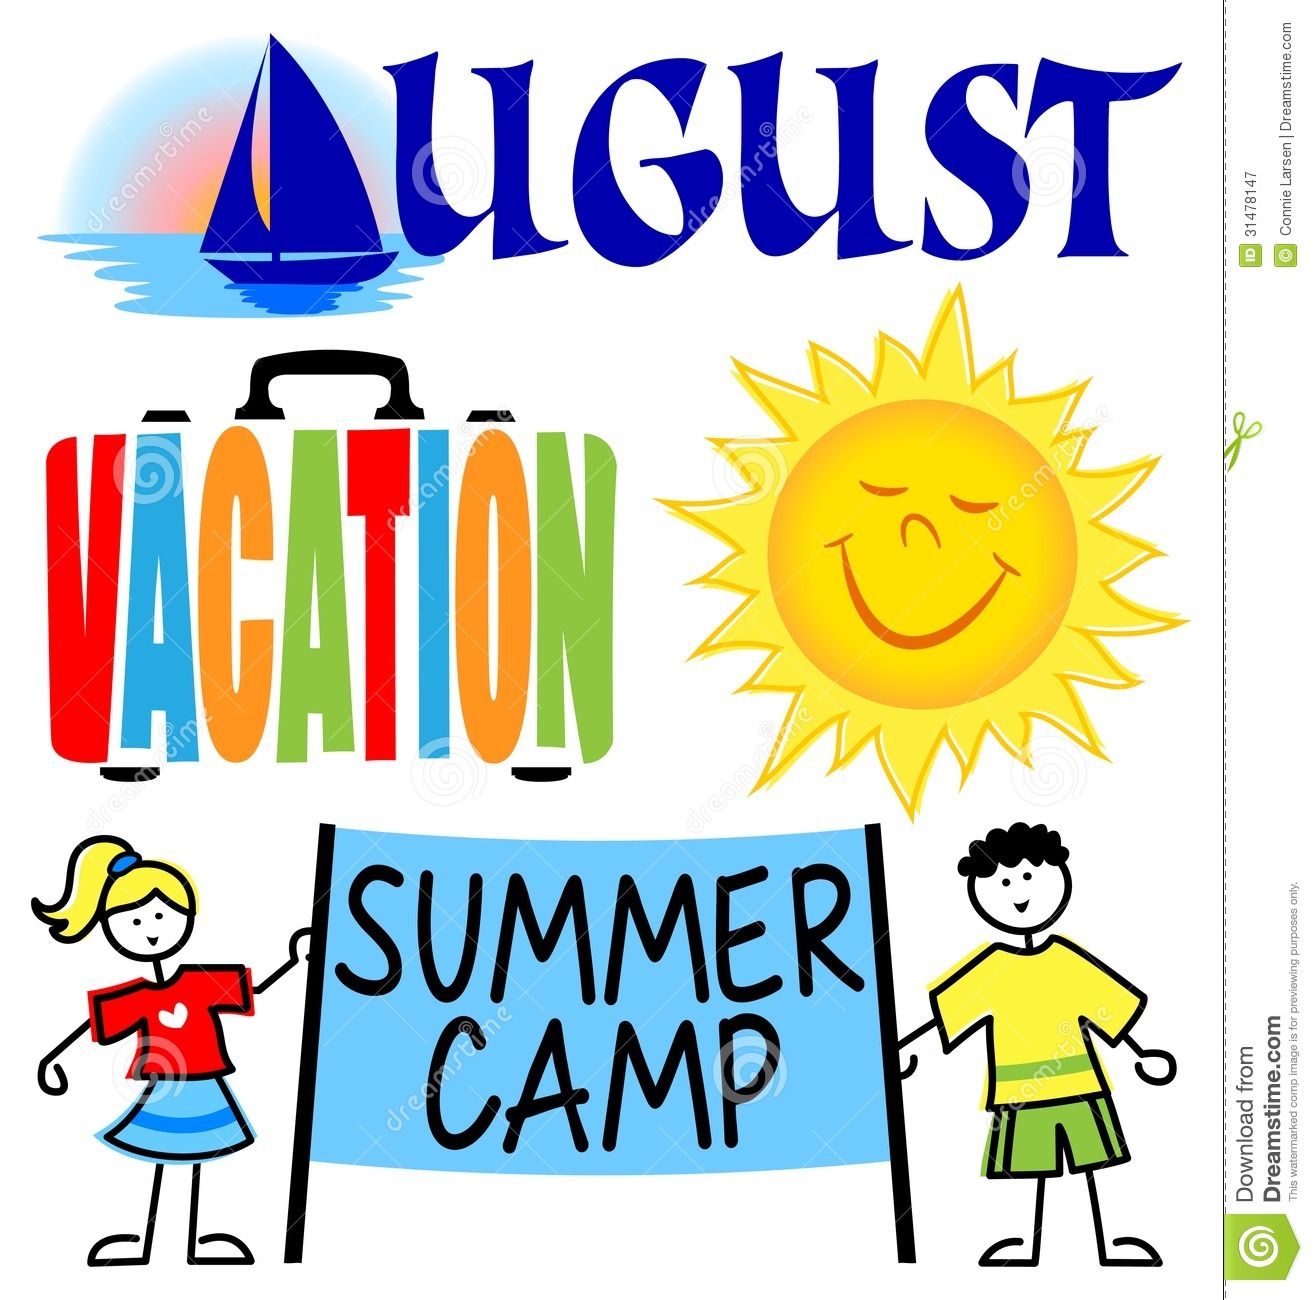 Illustrated Clips For August Including Vacation A Cartoon Sun Summer